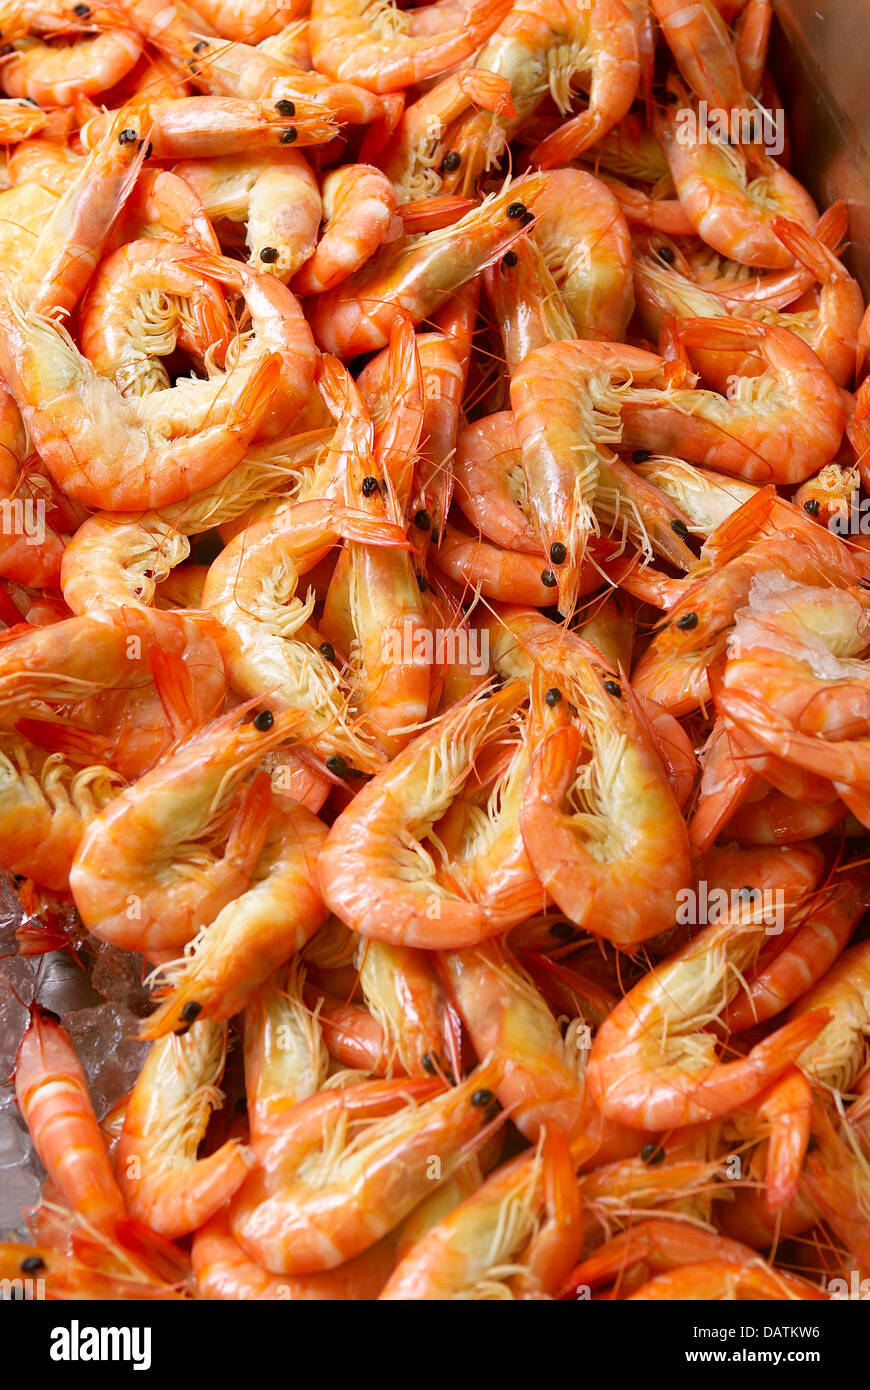 A pile of fresh pacific red prawns on ice. Stock Photo